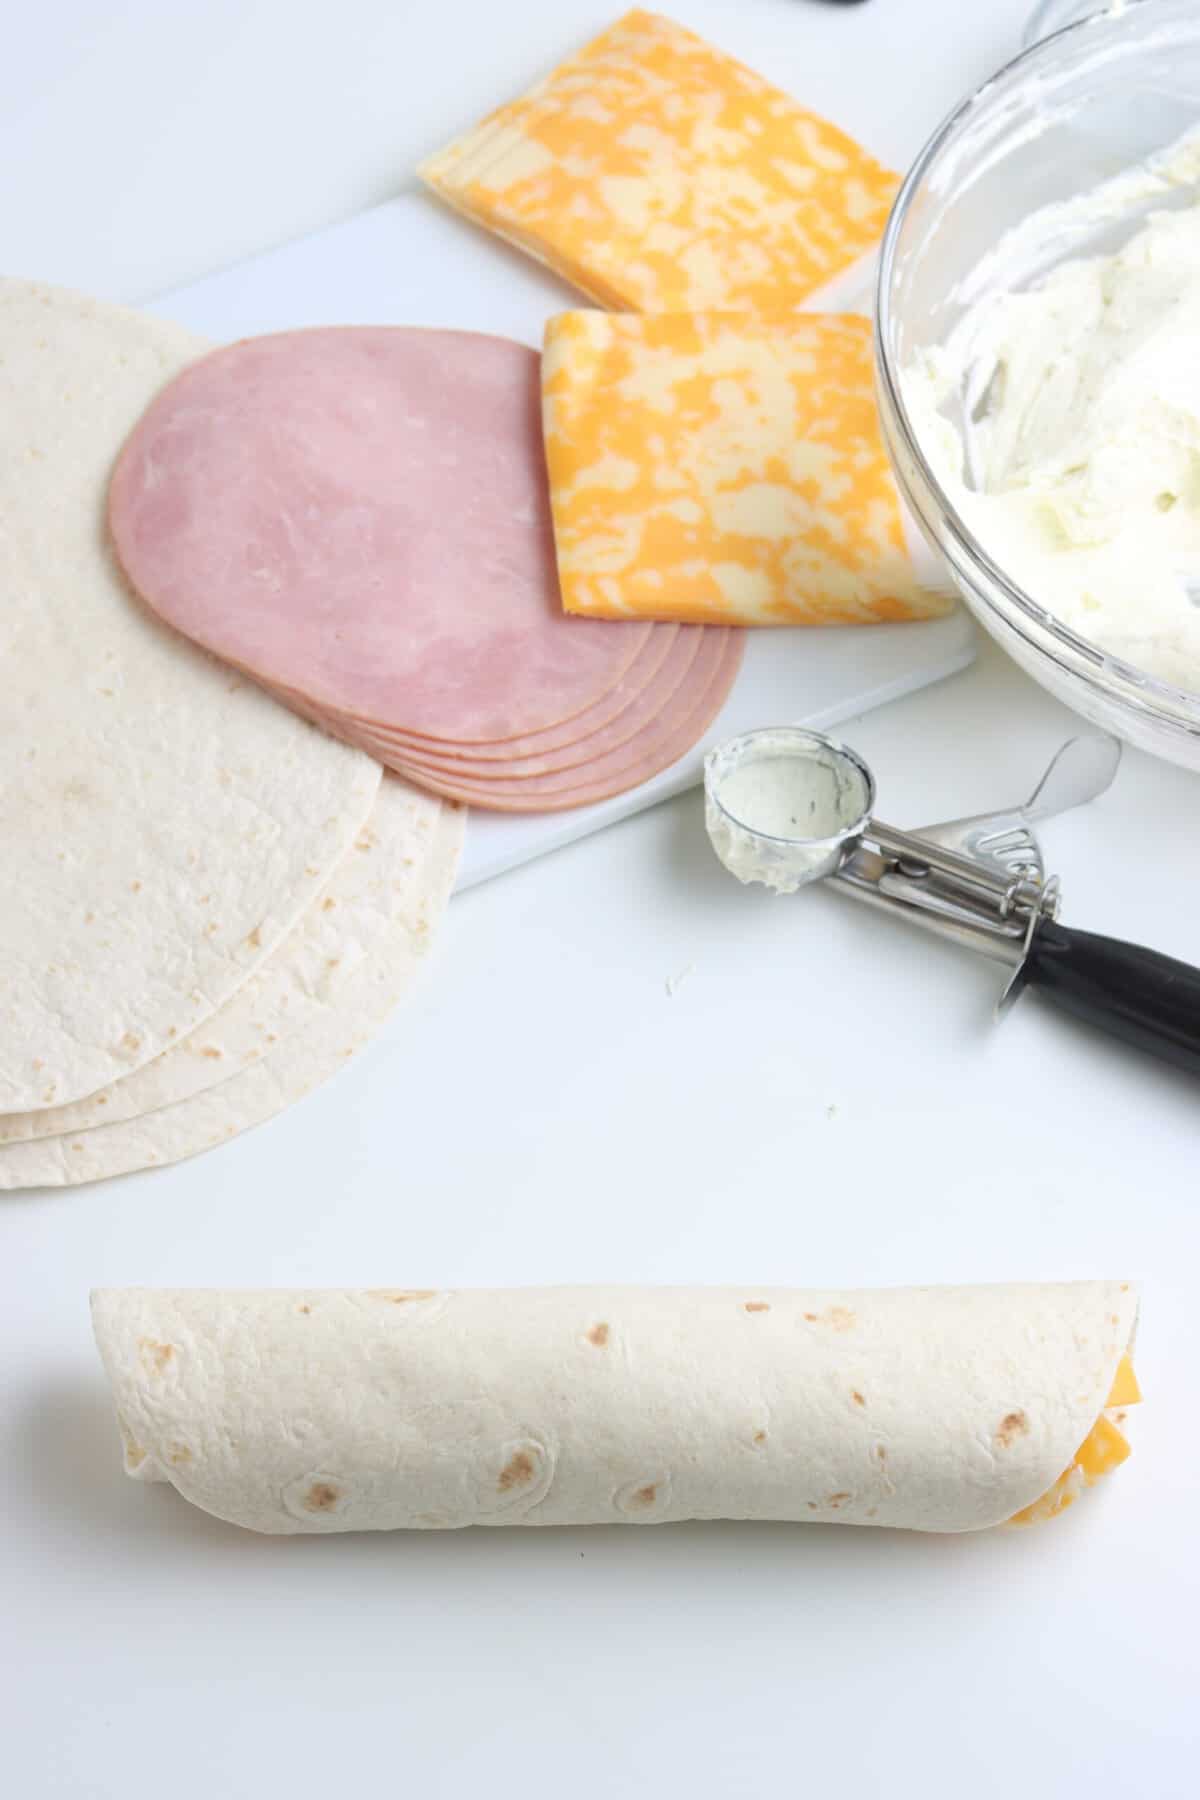 Roll up the Tortilla with Everything inside.